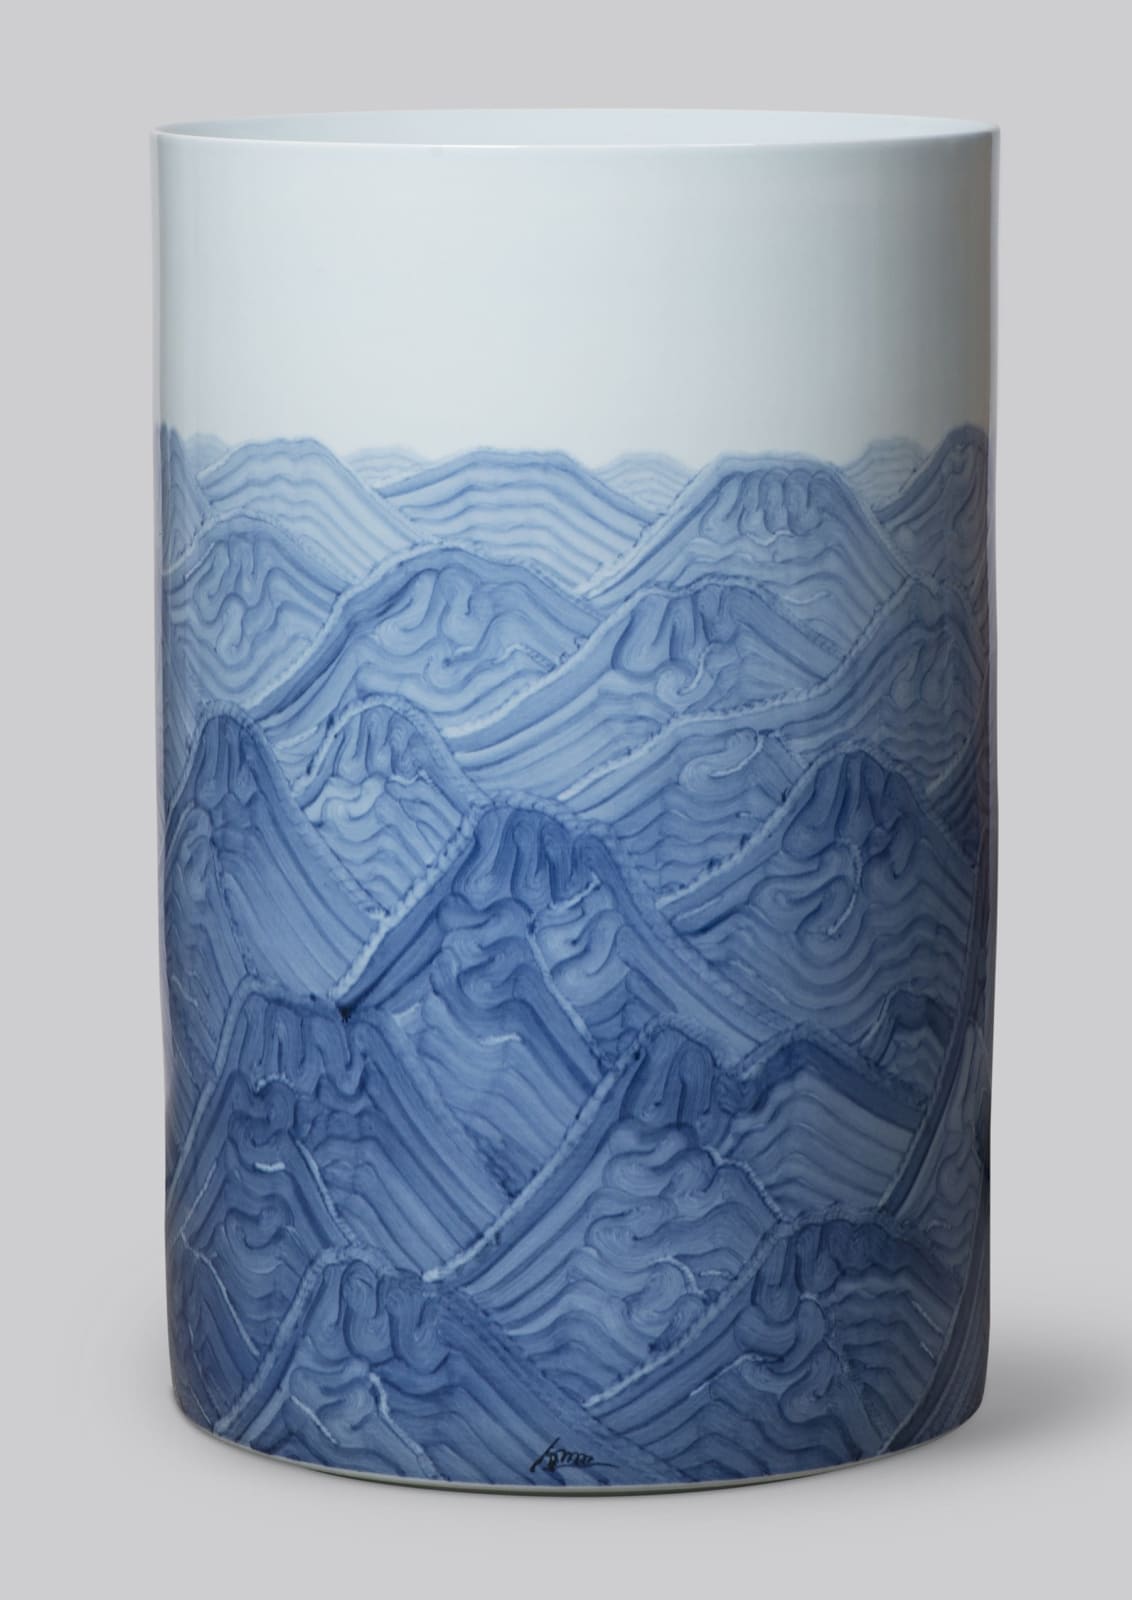 Bai Ming 白 明, Vibrant and Compassionate Mountains《青山仁愛》, 2016